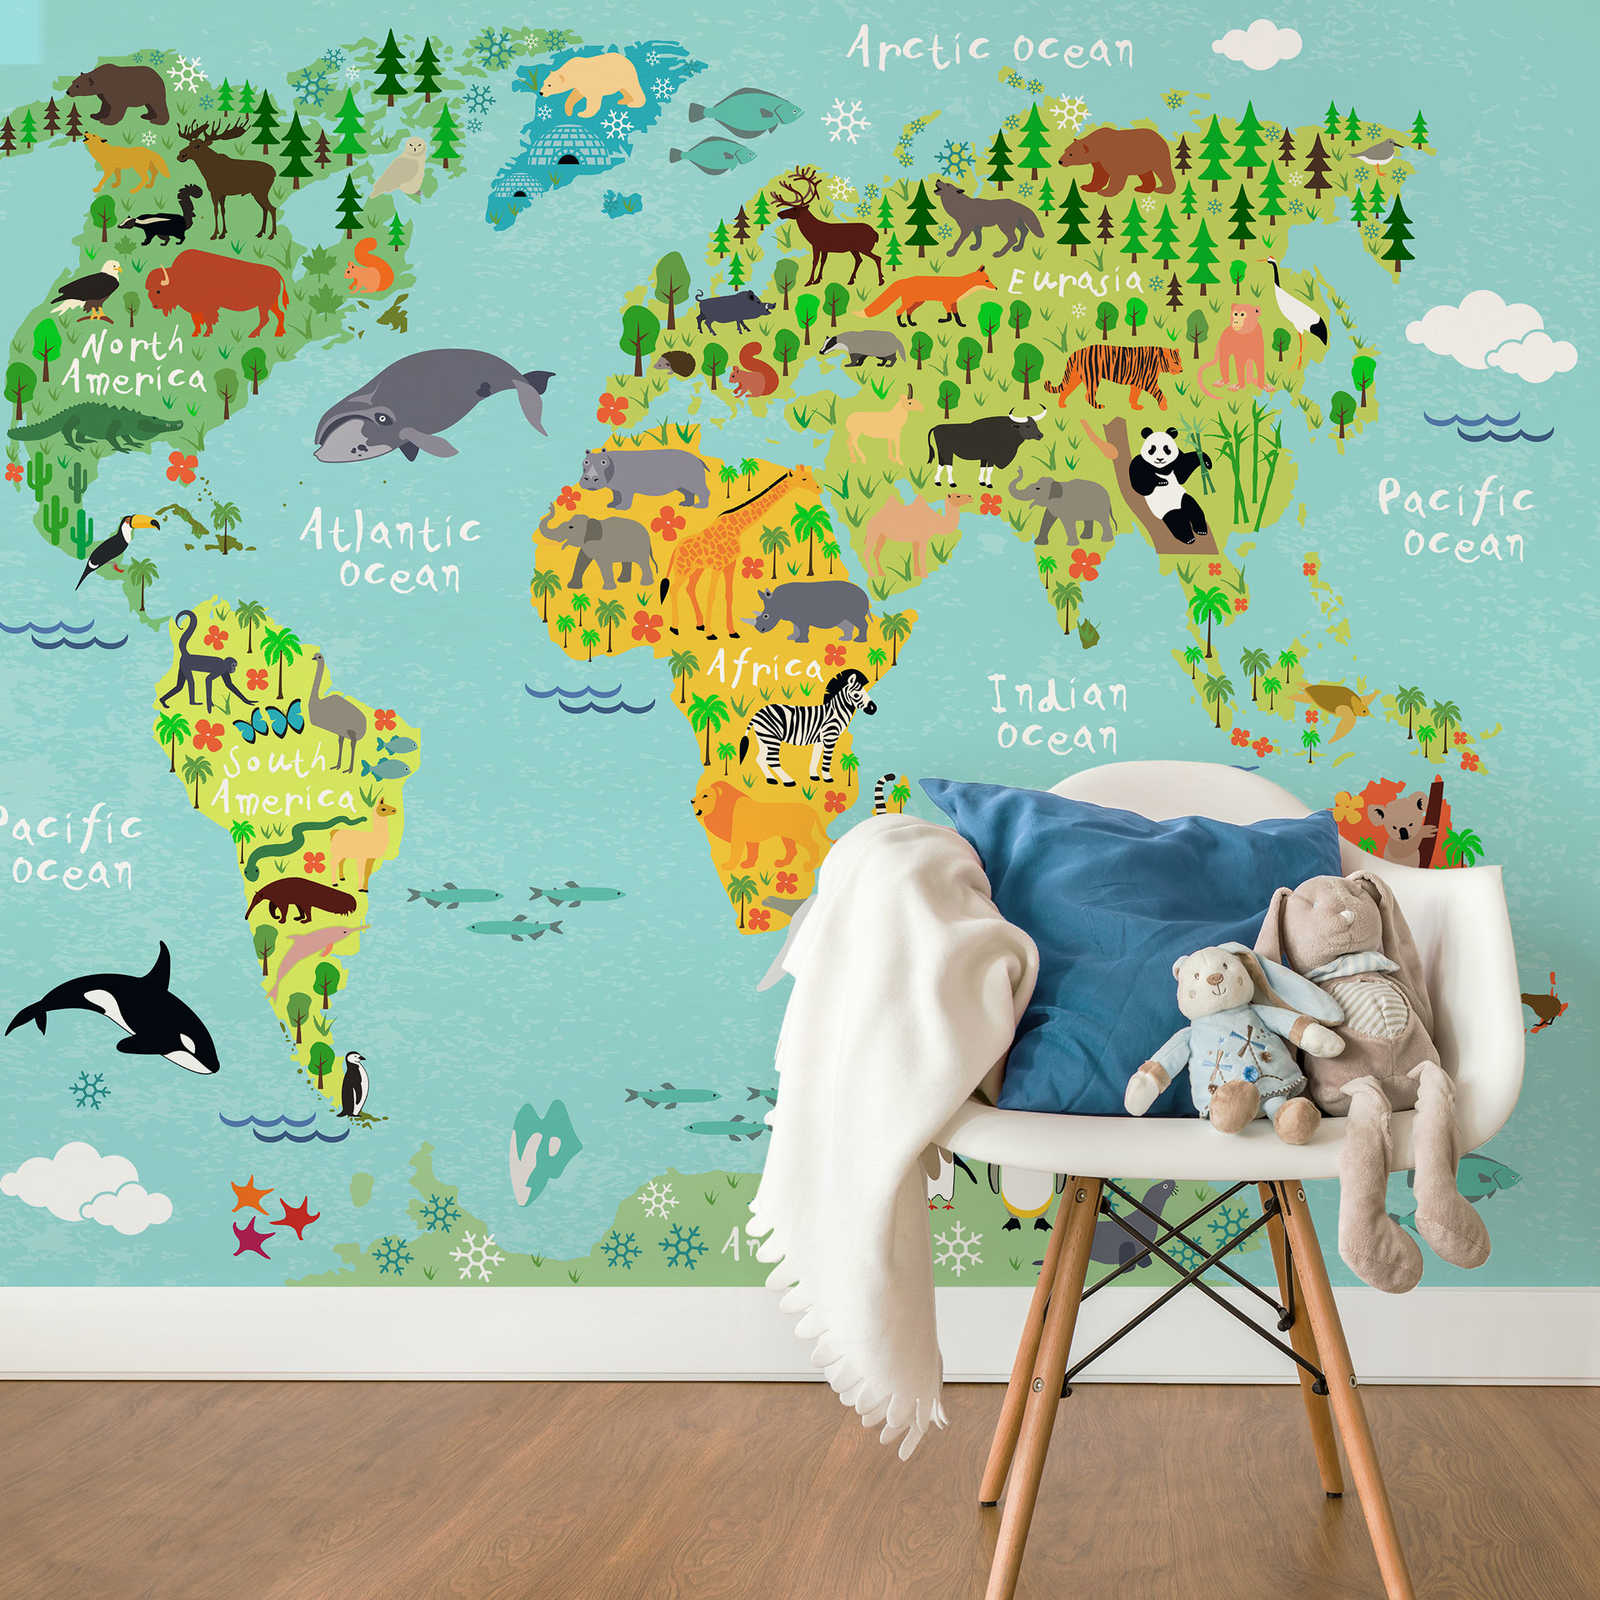             Photo wallpaper world map suitable for children - Colorful
        